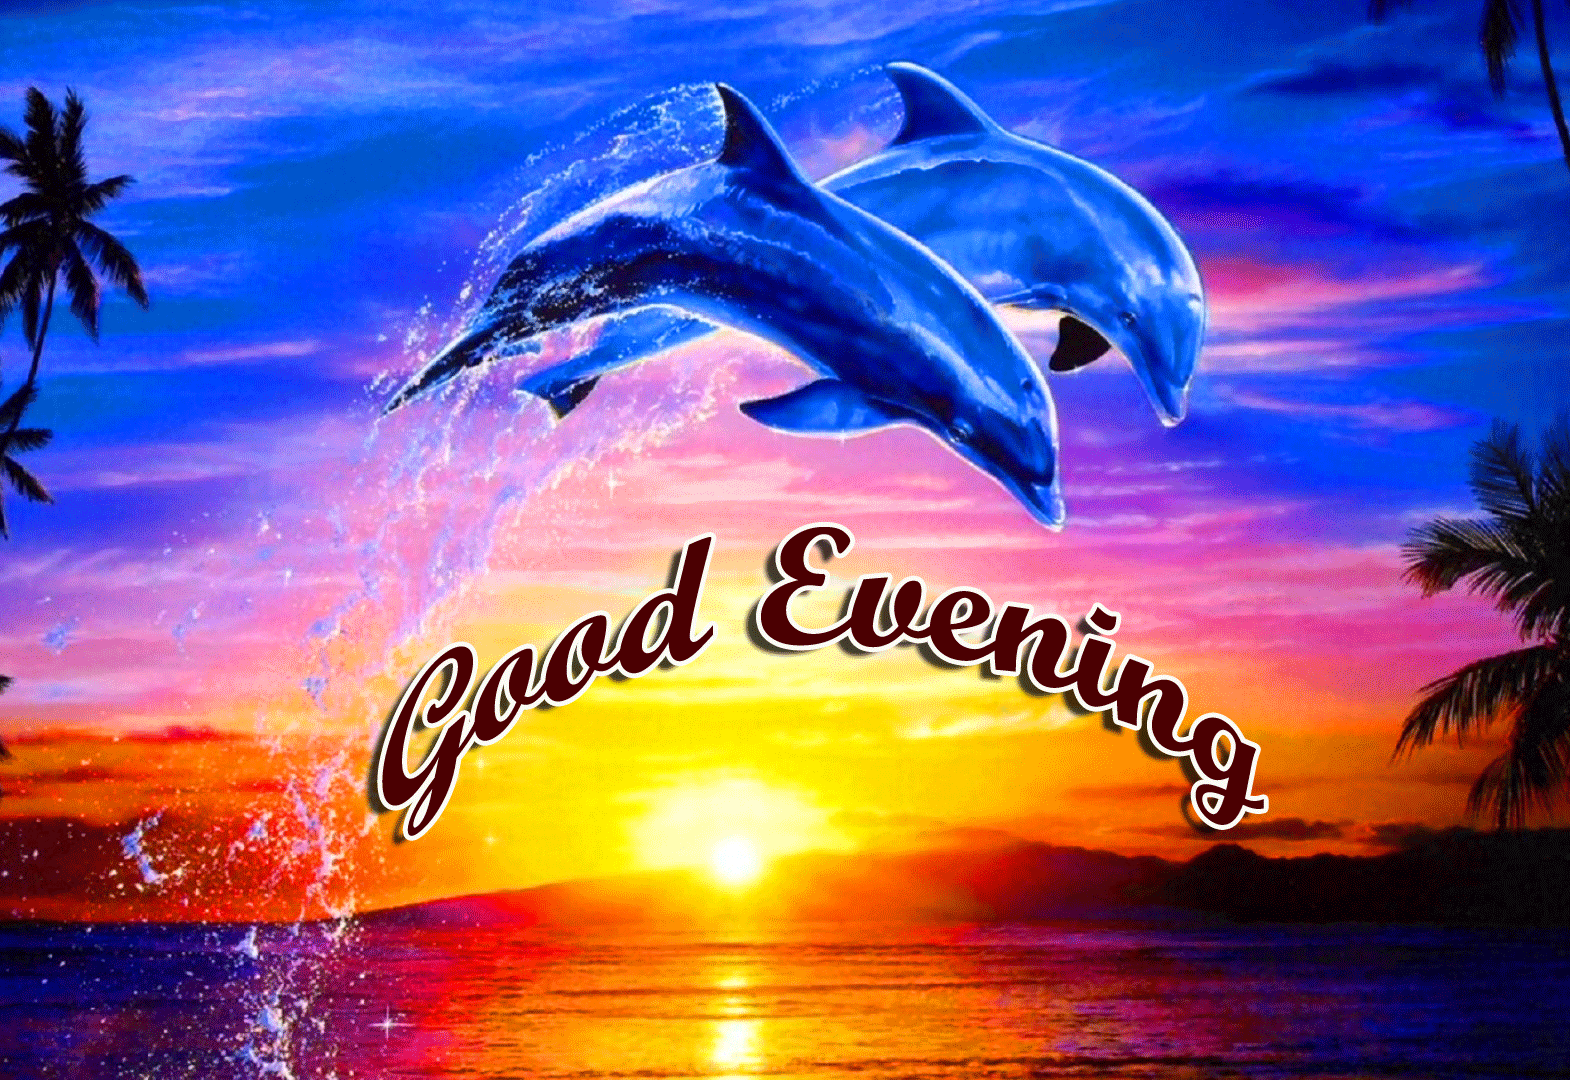 Good Evening Wishes Images Download 50